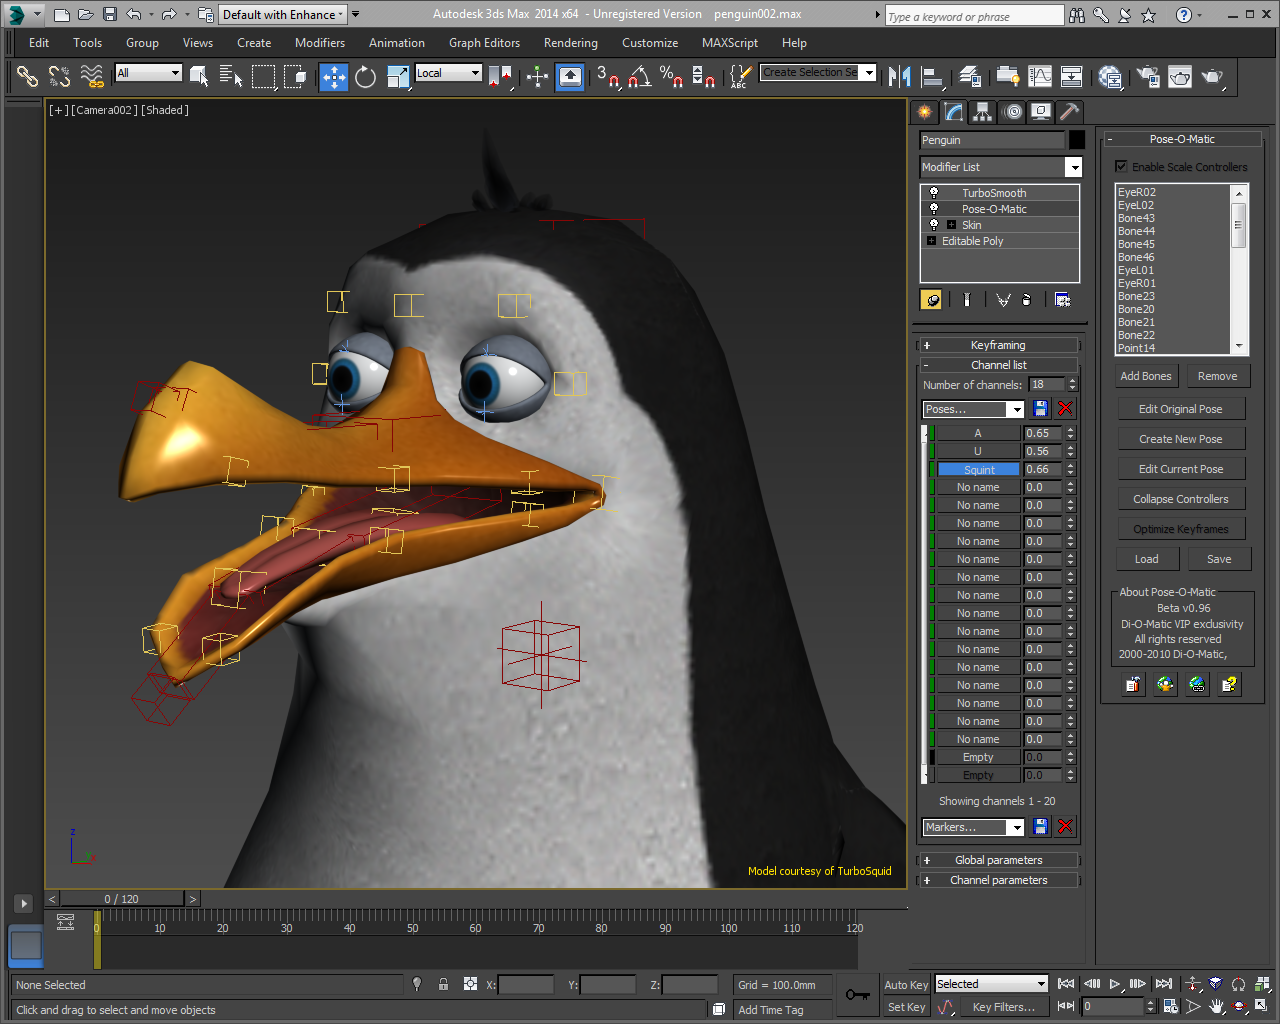 3ds max 2012 free download